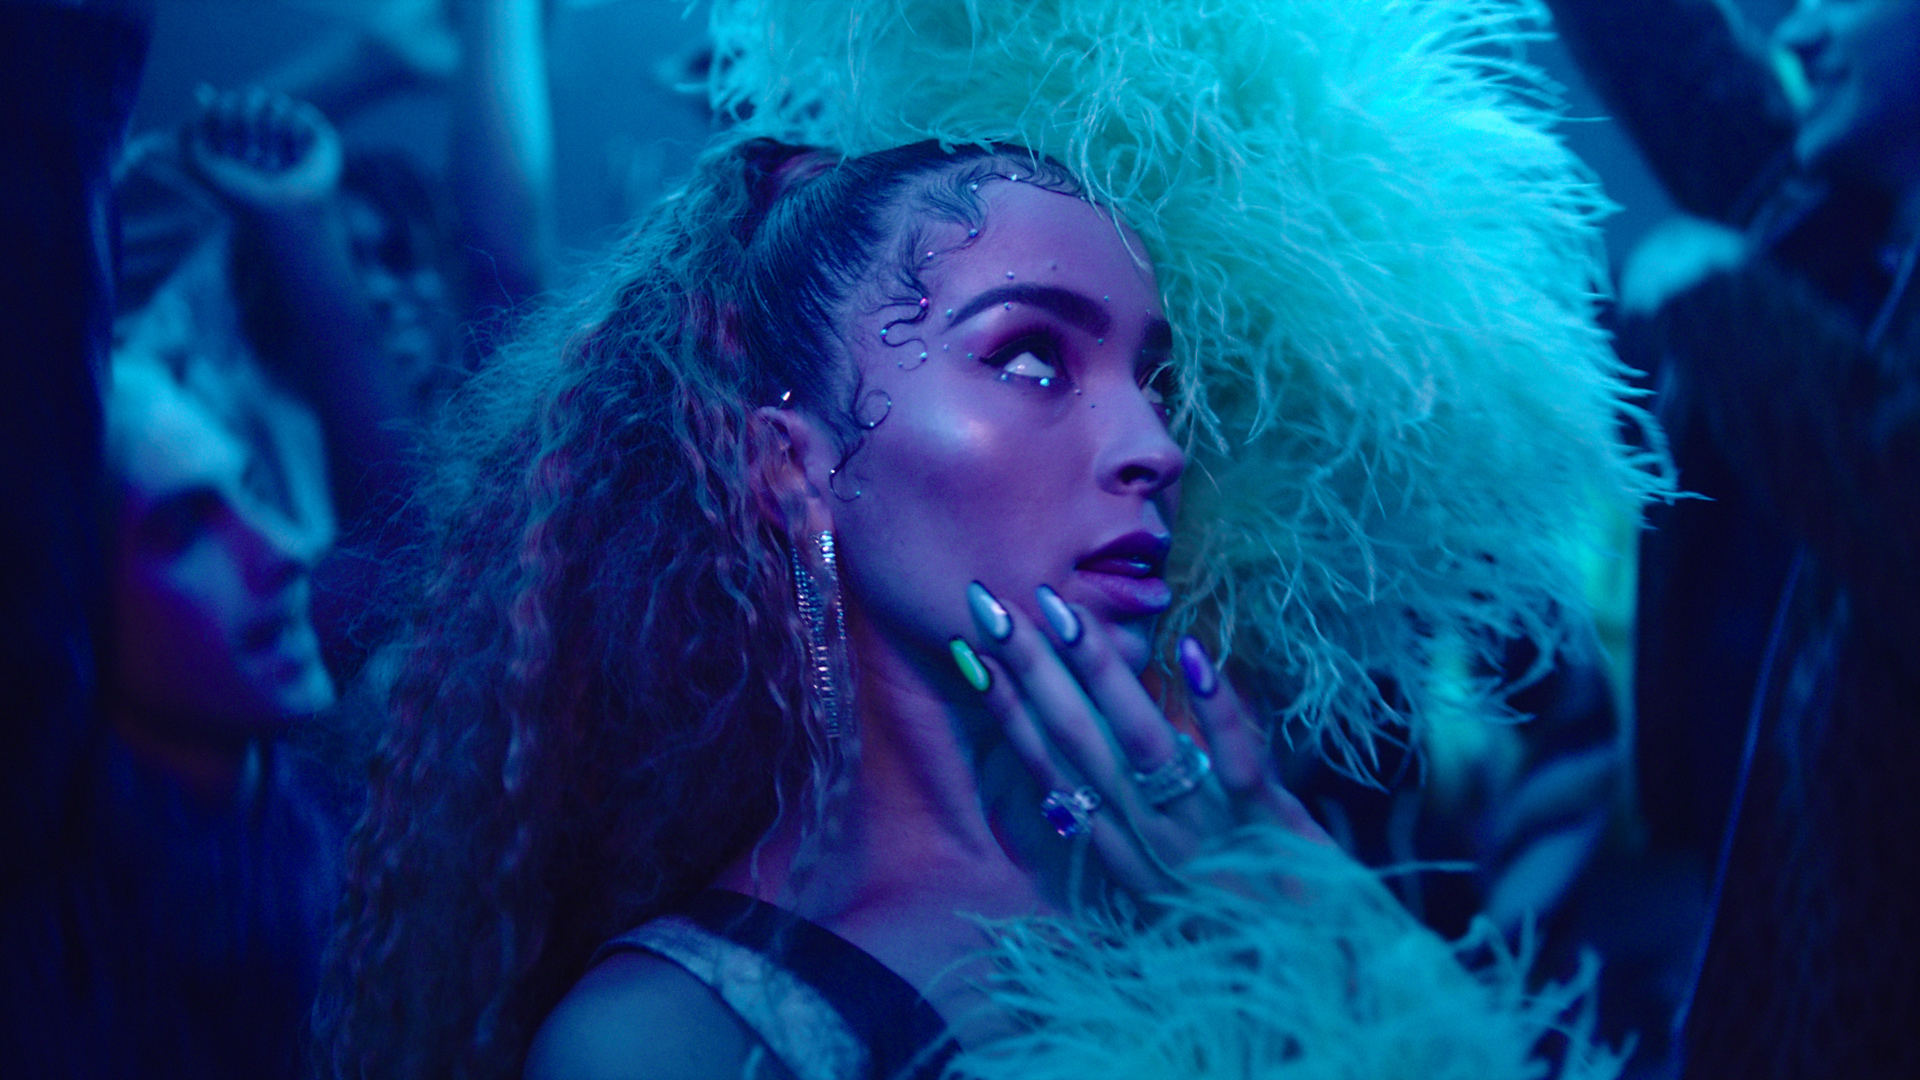 Partizan's Sophia Ray Directs High Energy Music Video for Ella Eyre